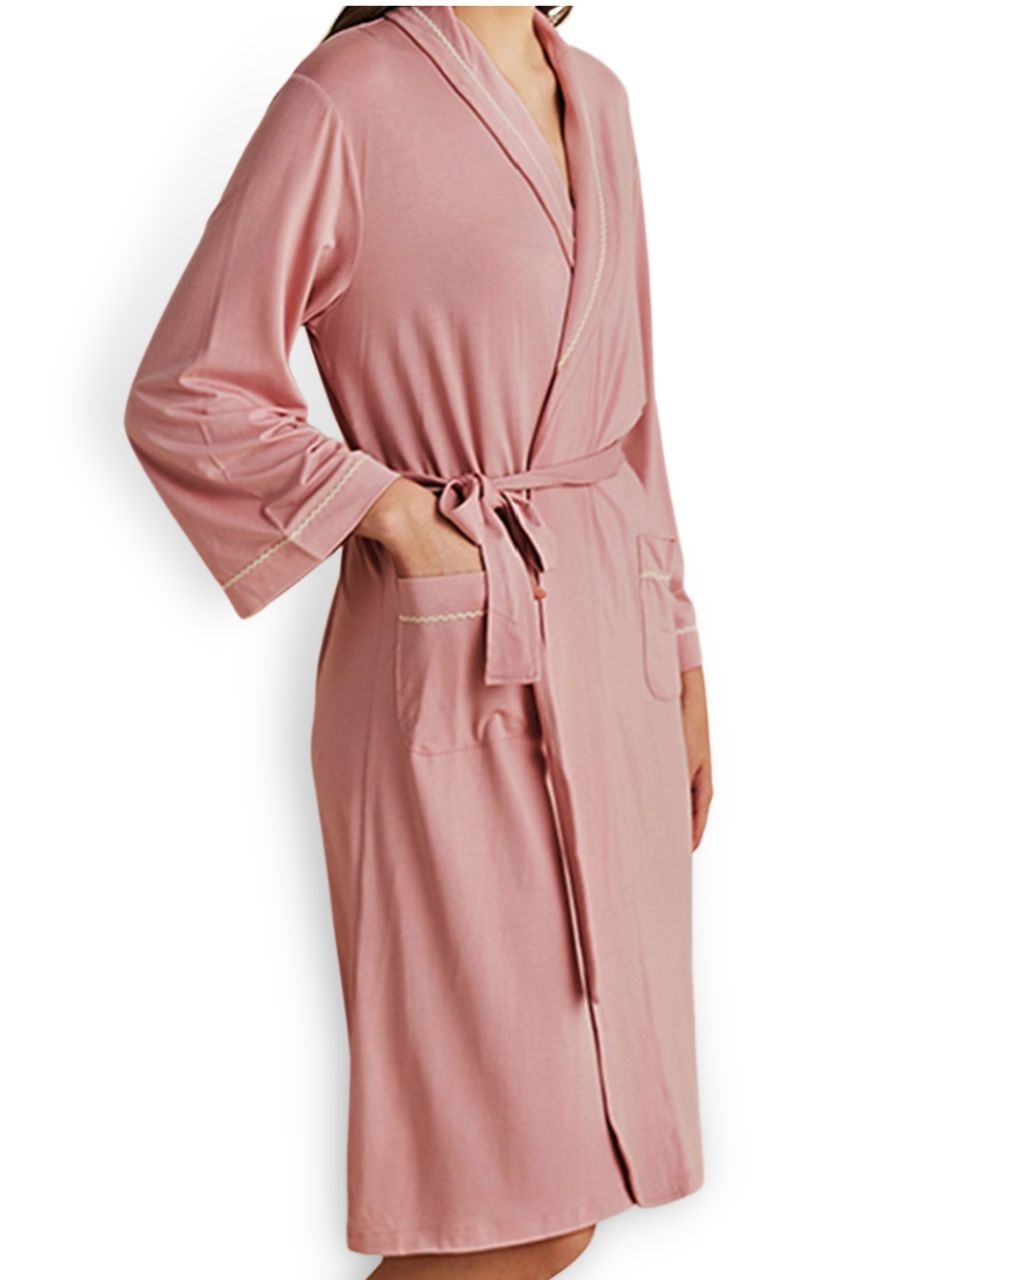 Womens Bamboo Dressing Gown - Blush Pink